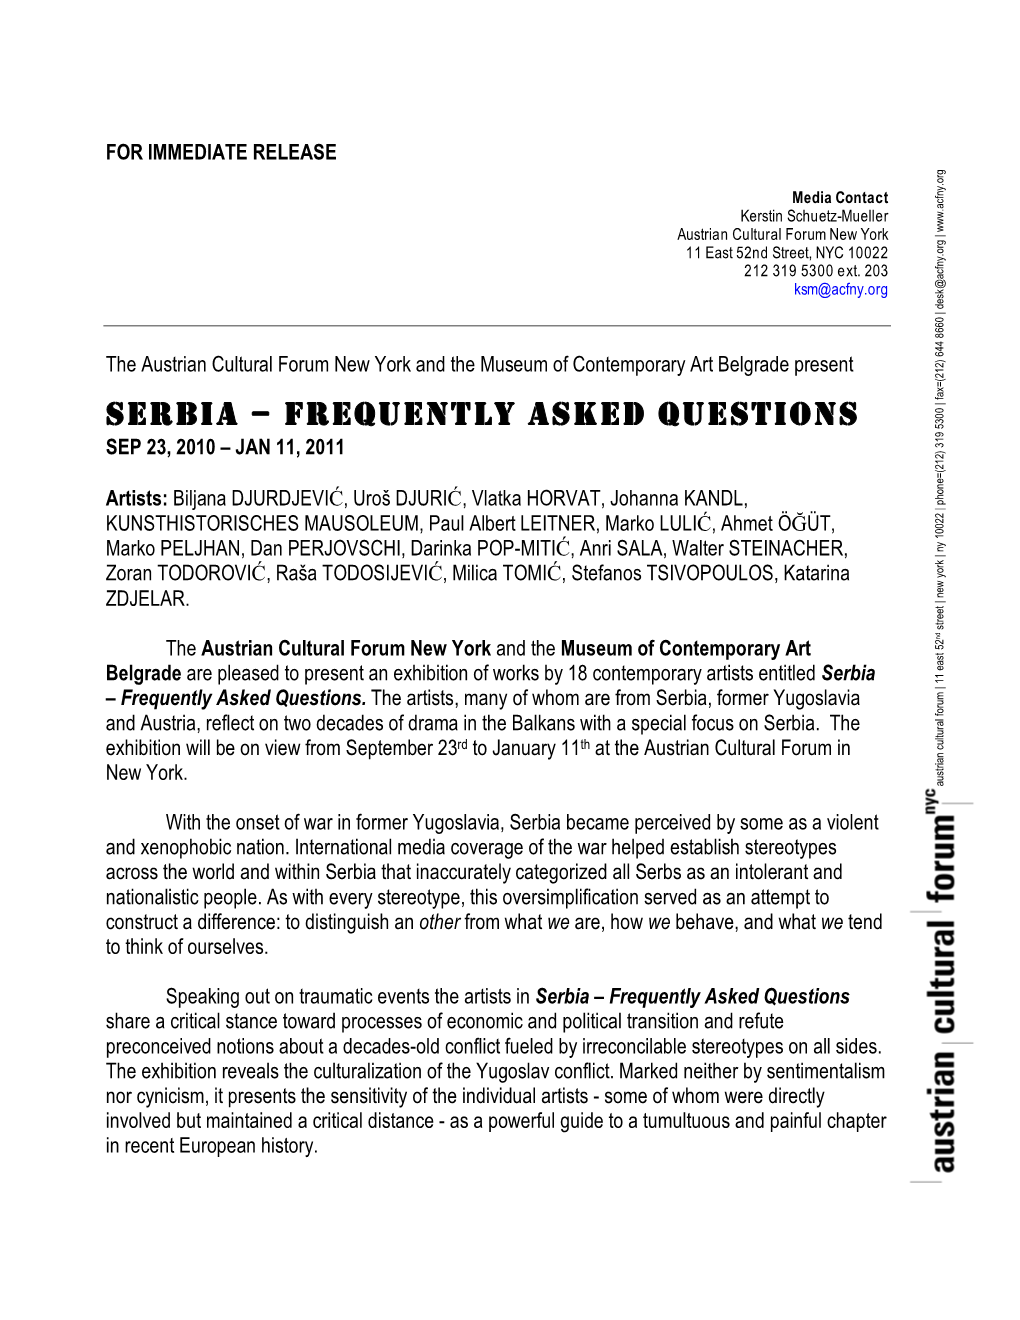 Serbia – Frequently Asked Questions Sep 23, 2010 – Jan 11, 2011